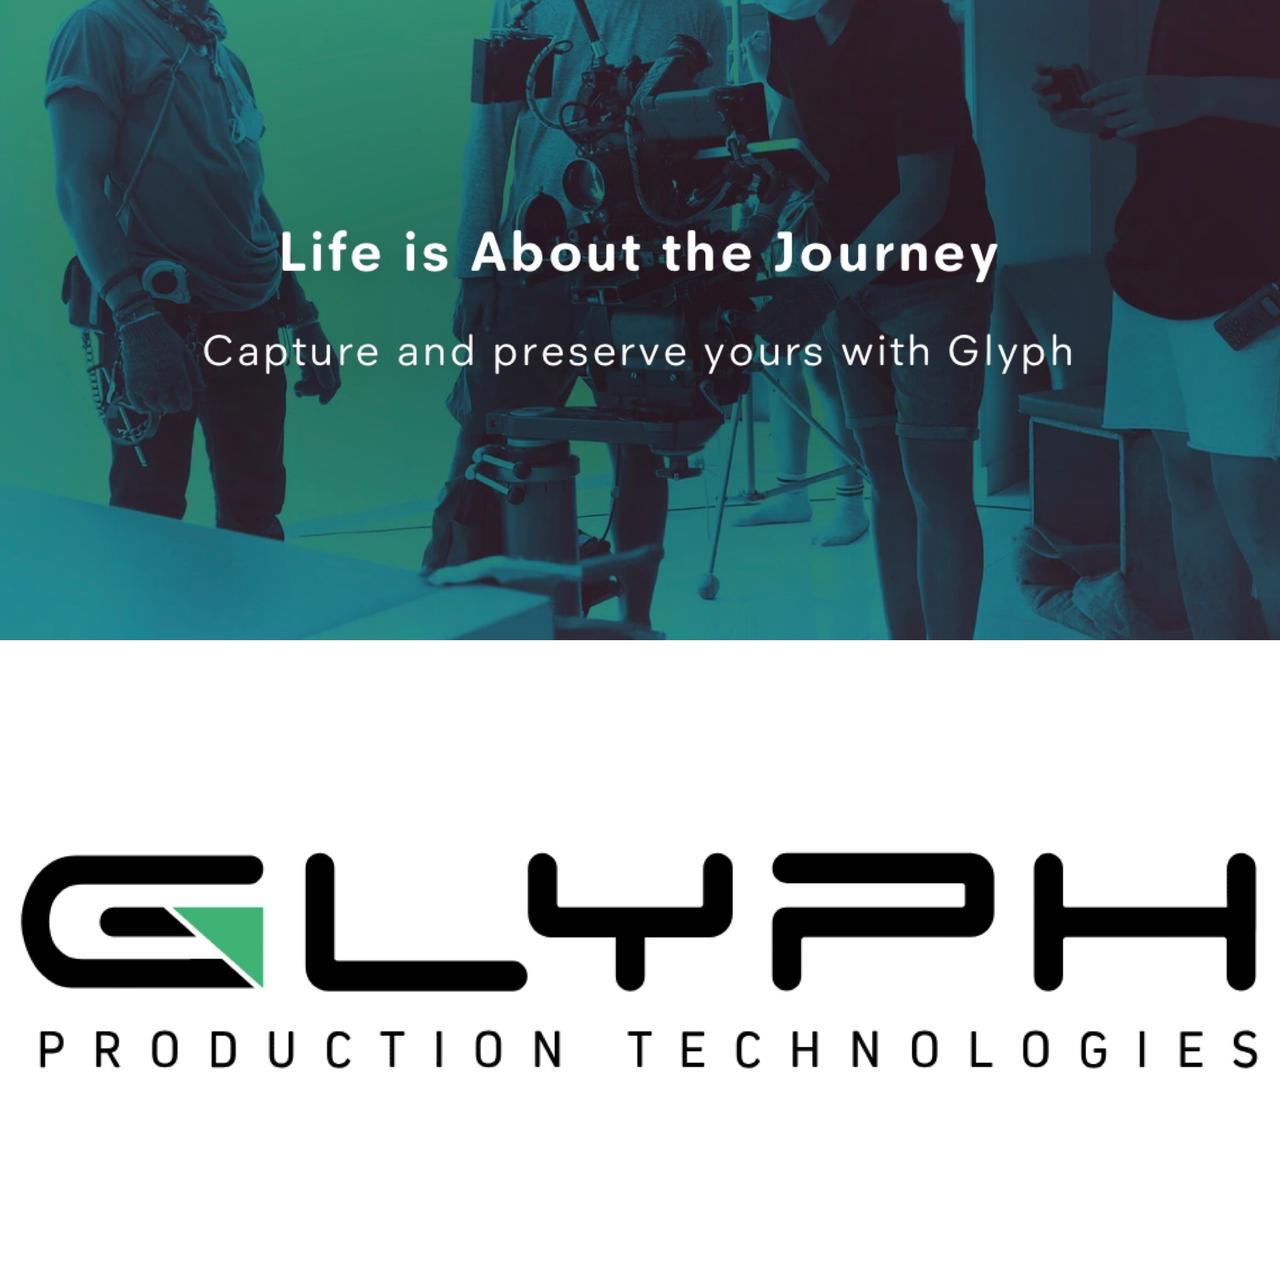 Our Proud Partnership with Glyph technologies